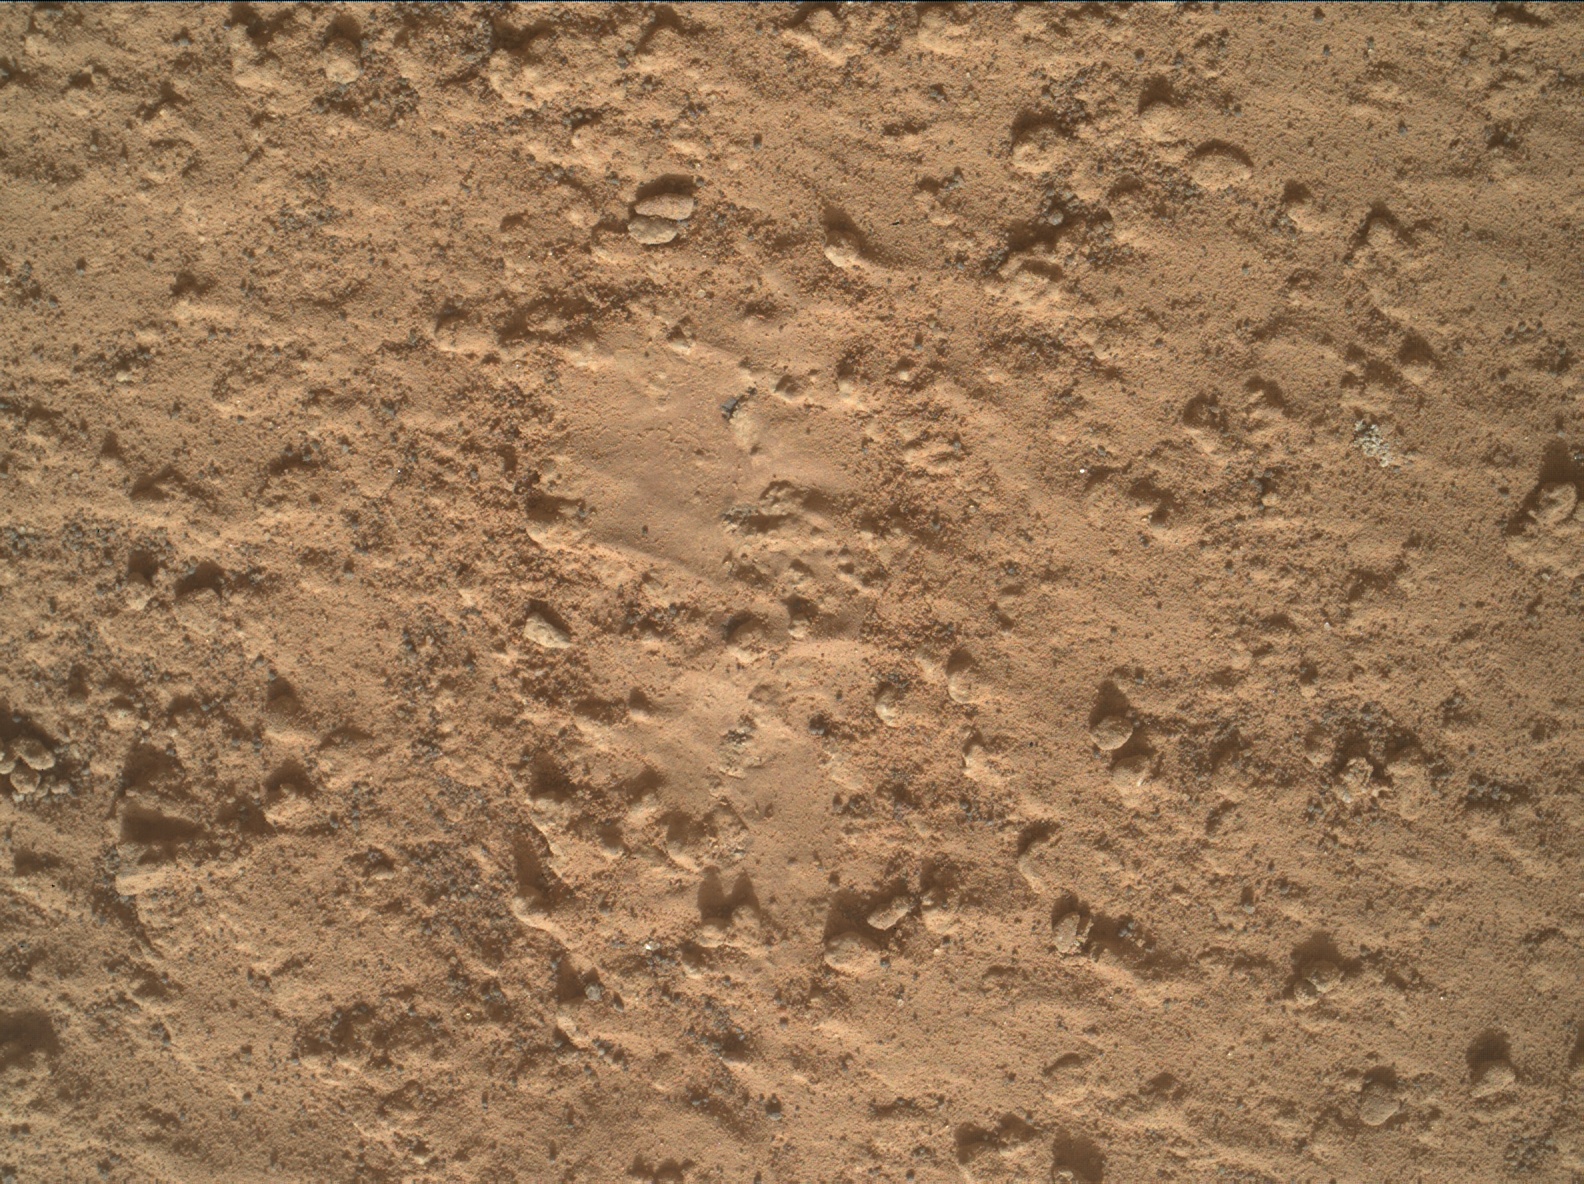 Nasa's Mars rover Curiosity acquired this image using its Mars Hand Lens Imager (MAHLI) on Sol 3578